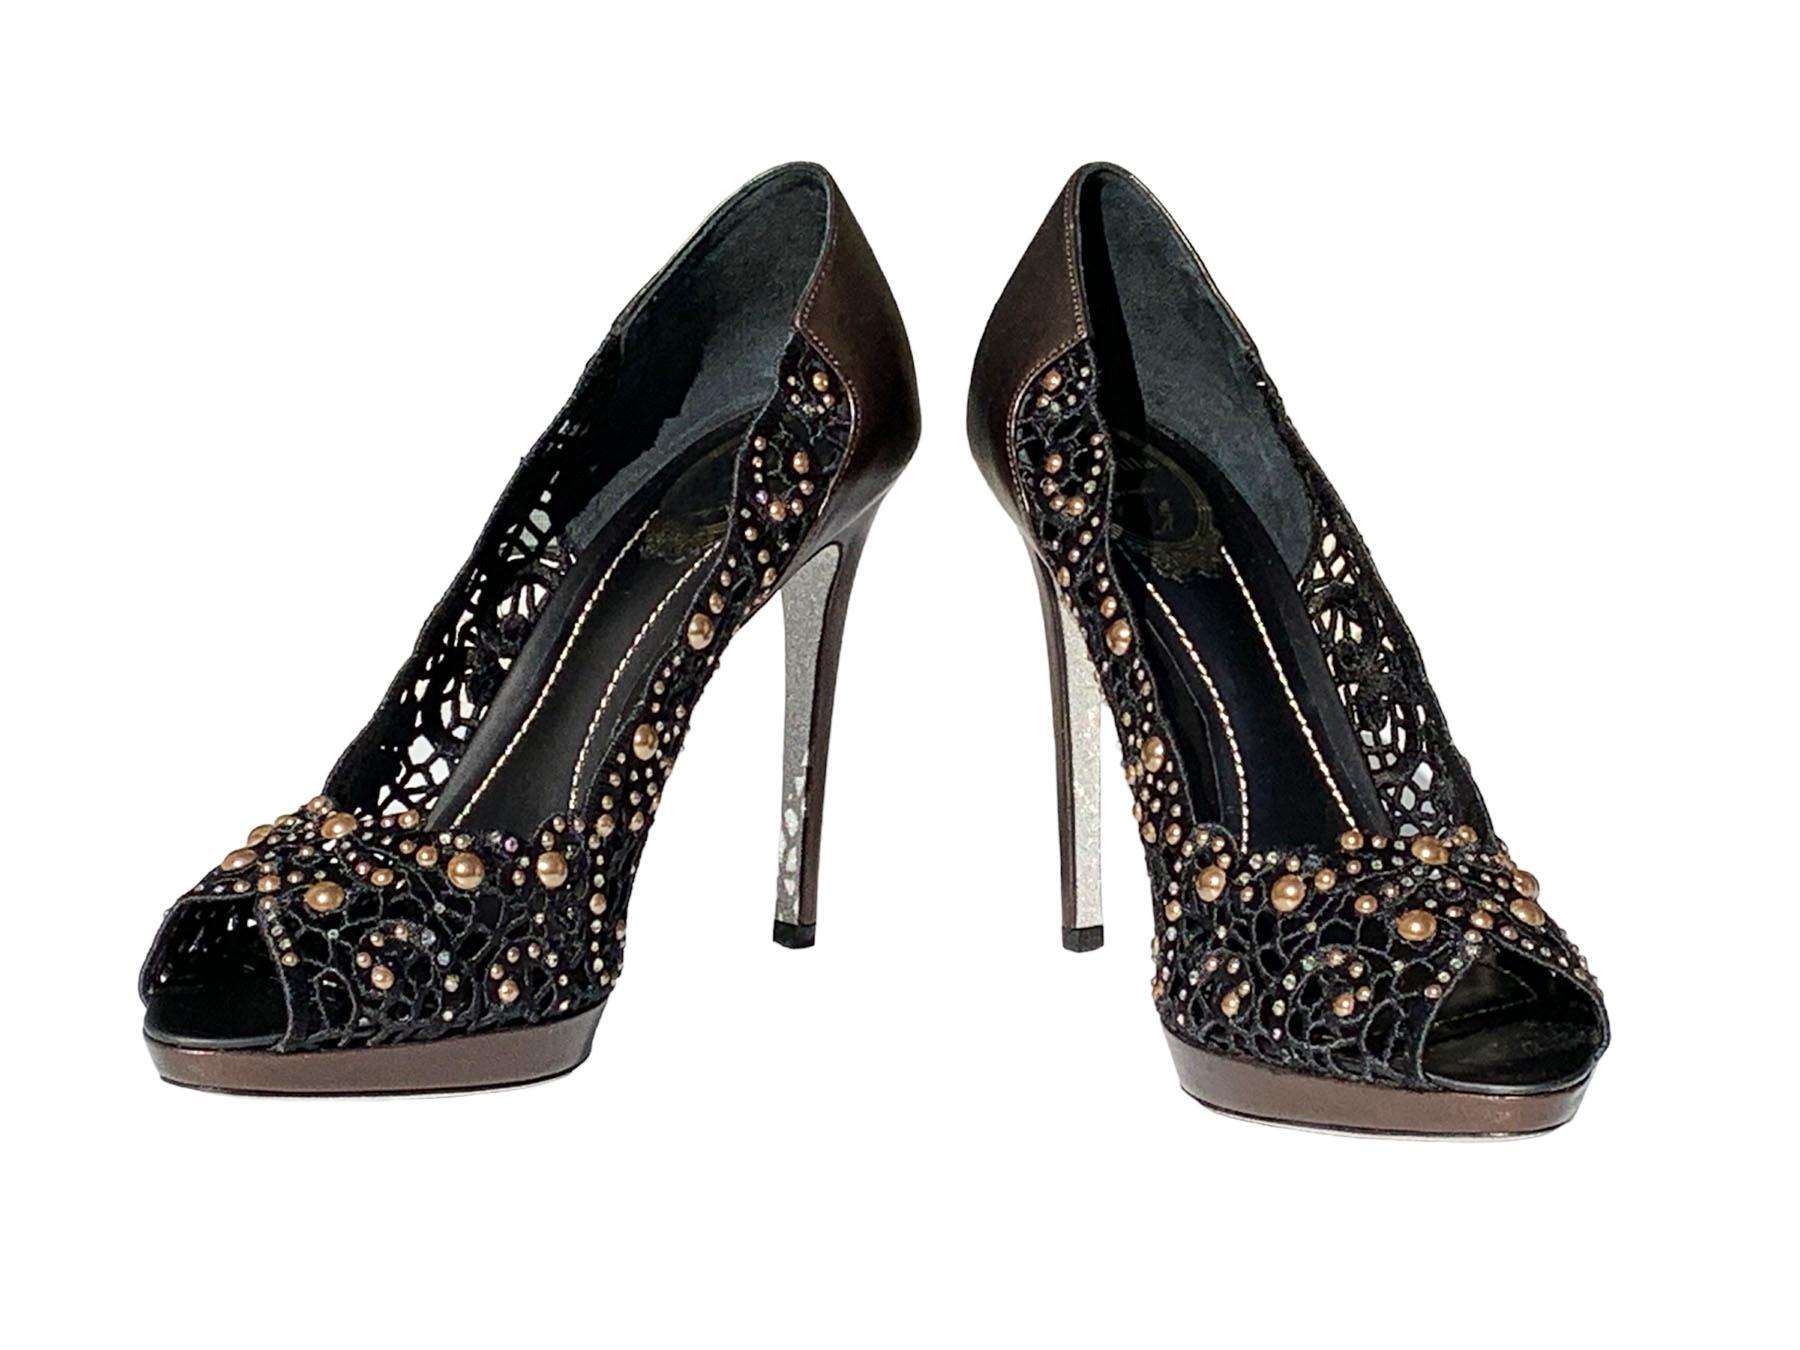 New Rene Caovilla Lace Leather Embellished Shoes Pumps
Italian size 41 - US 11
These stunning pumps by René Caovilla are the epitome of sophistication. Made from intricate black lace and brown leather. Embellished with clear crystals and smoky-brown